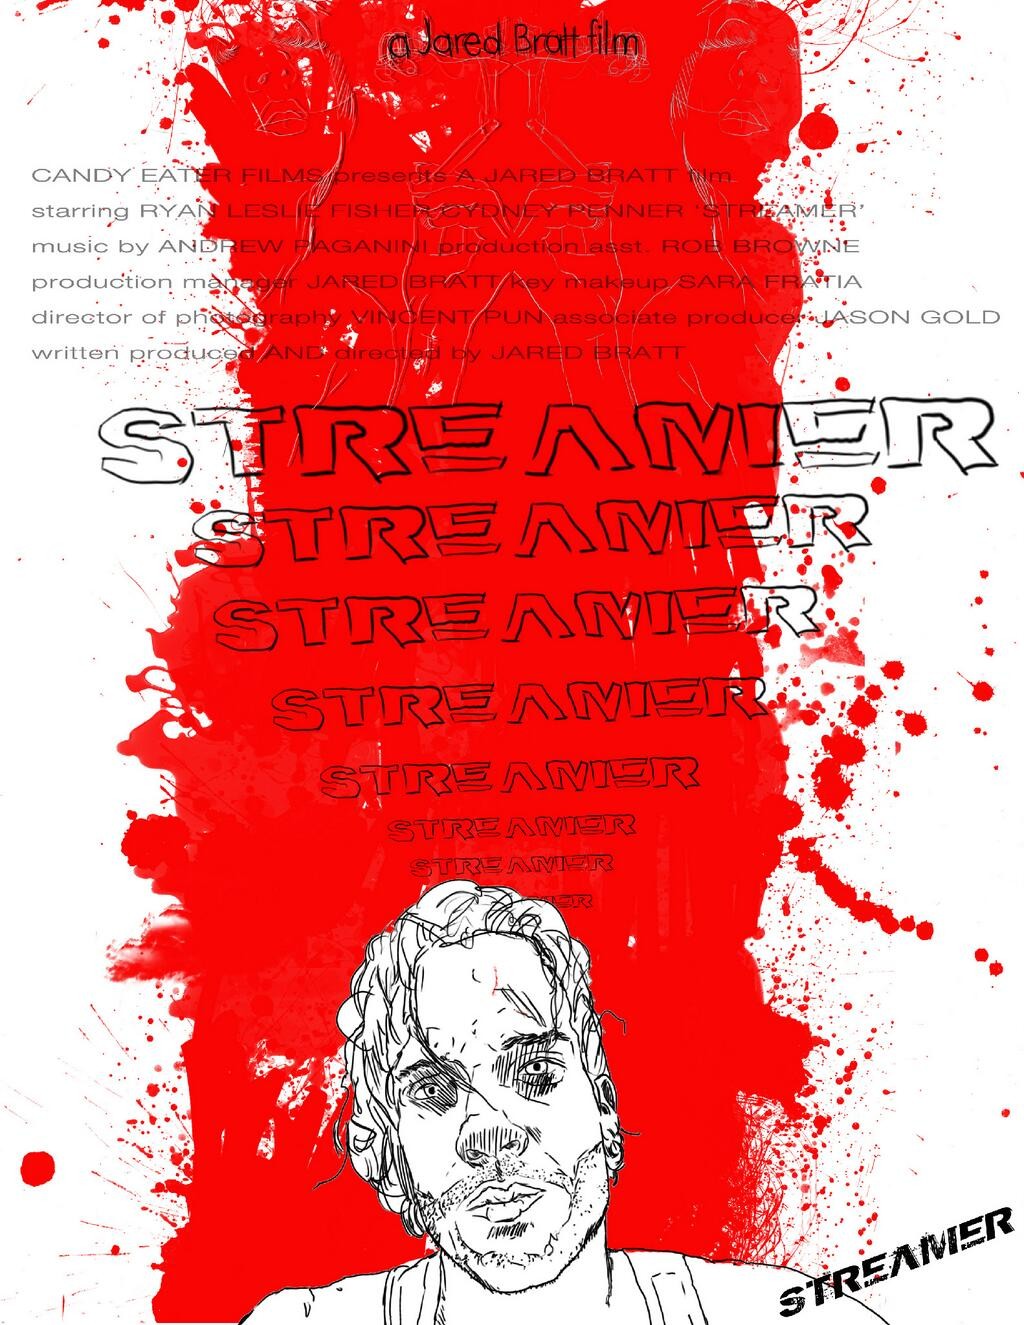 Extra Large Movie Poster Image for Streamer